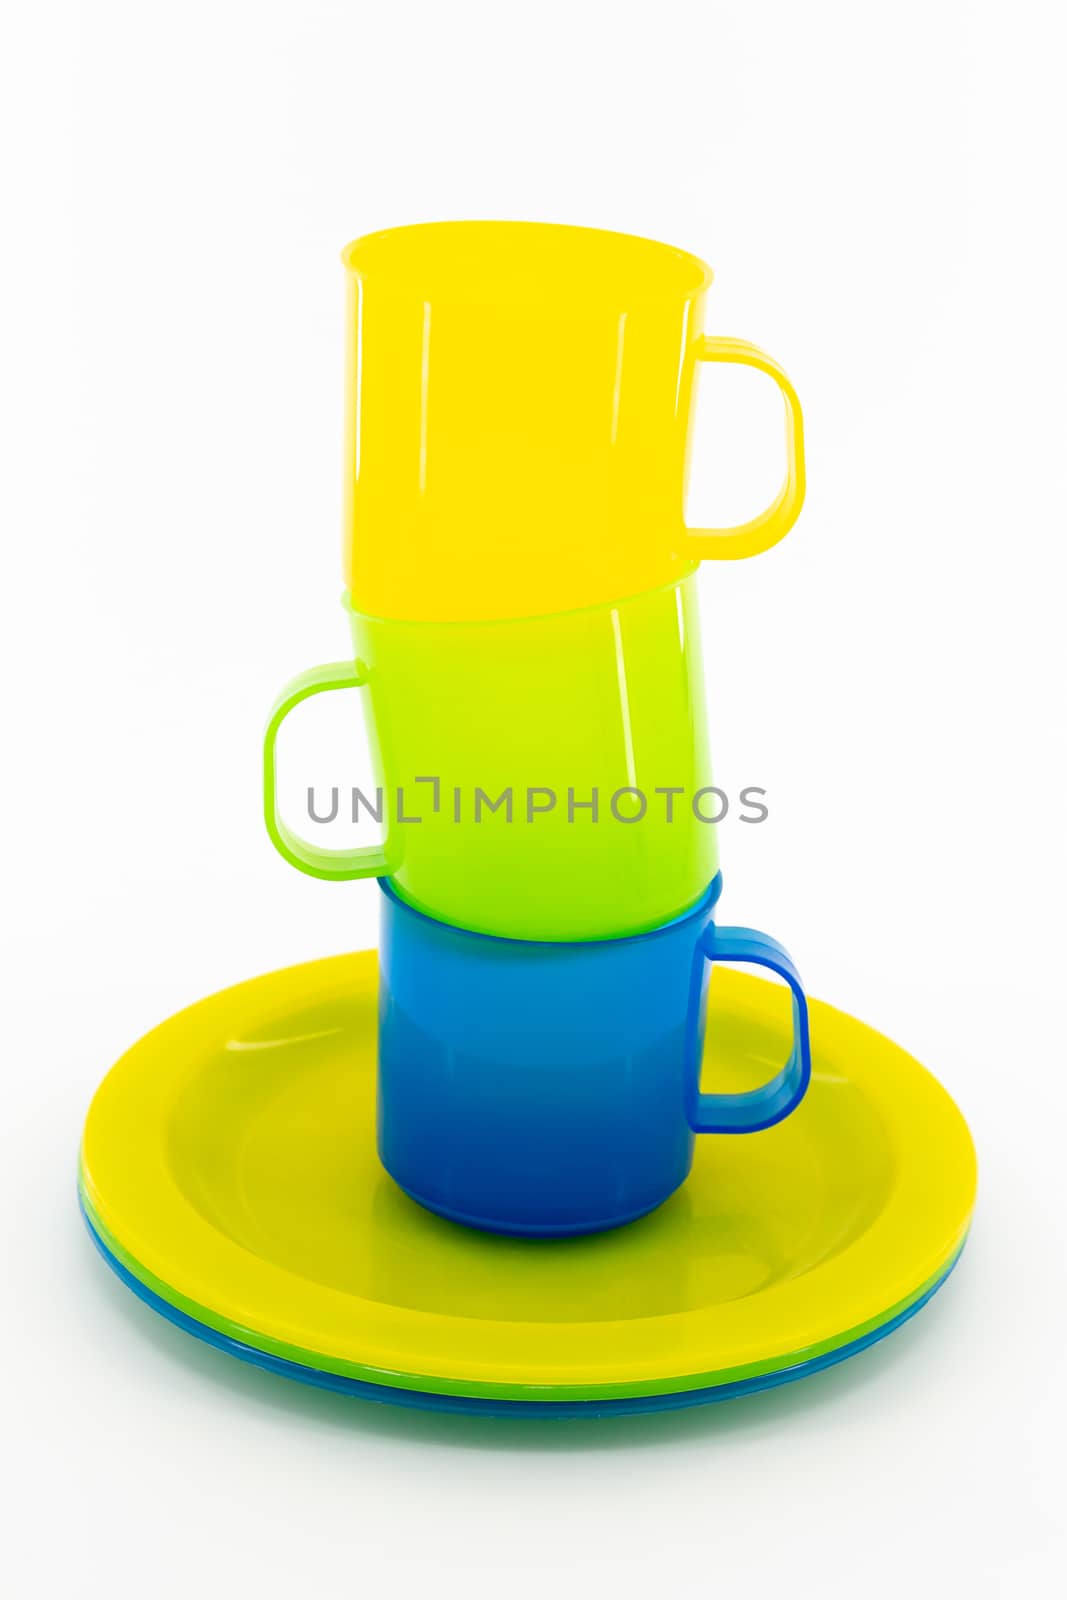 The three colored mugs and three colored saucers on a white background